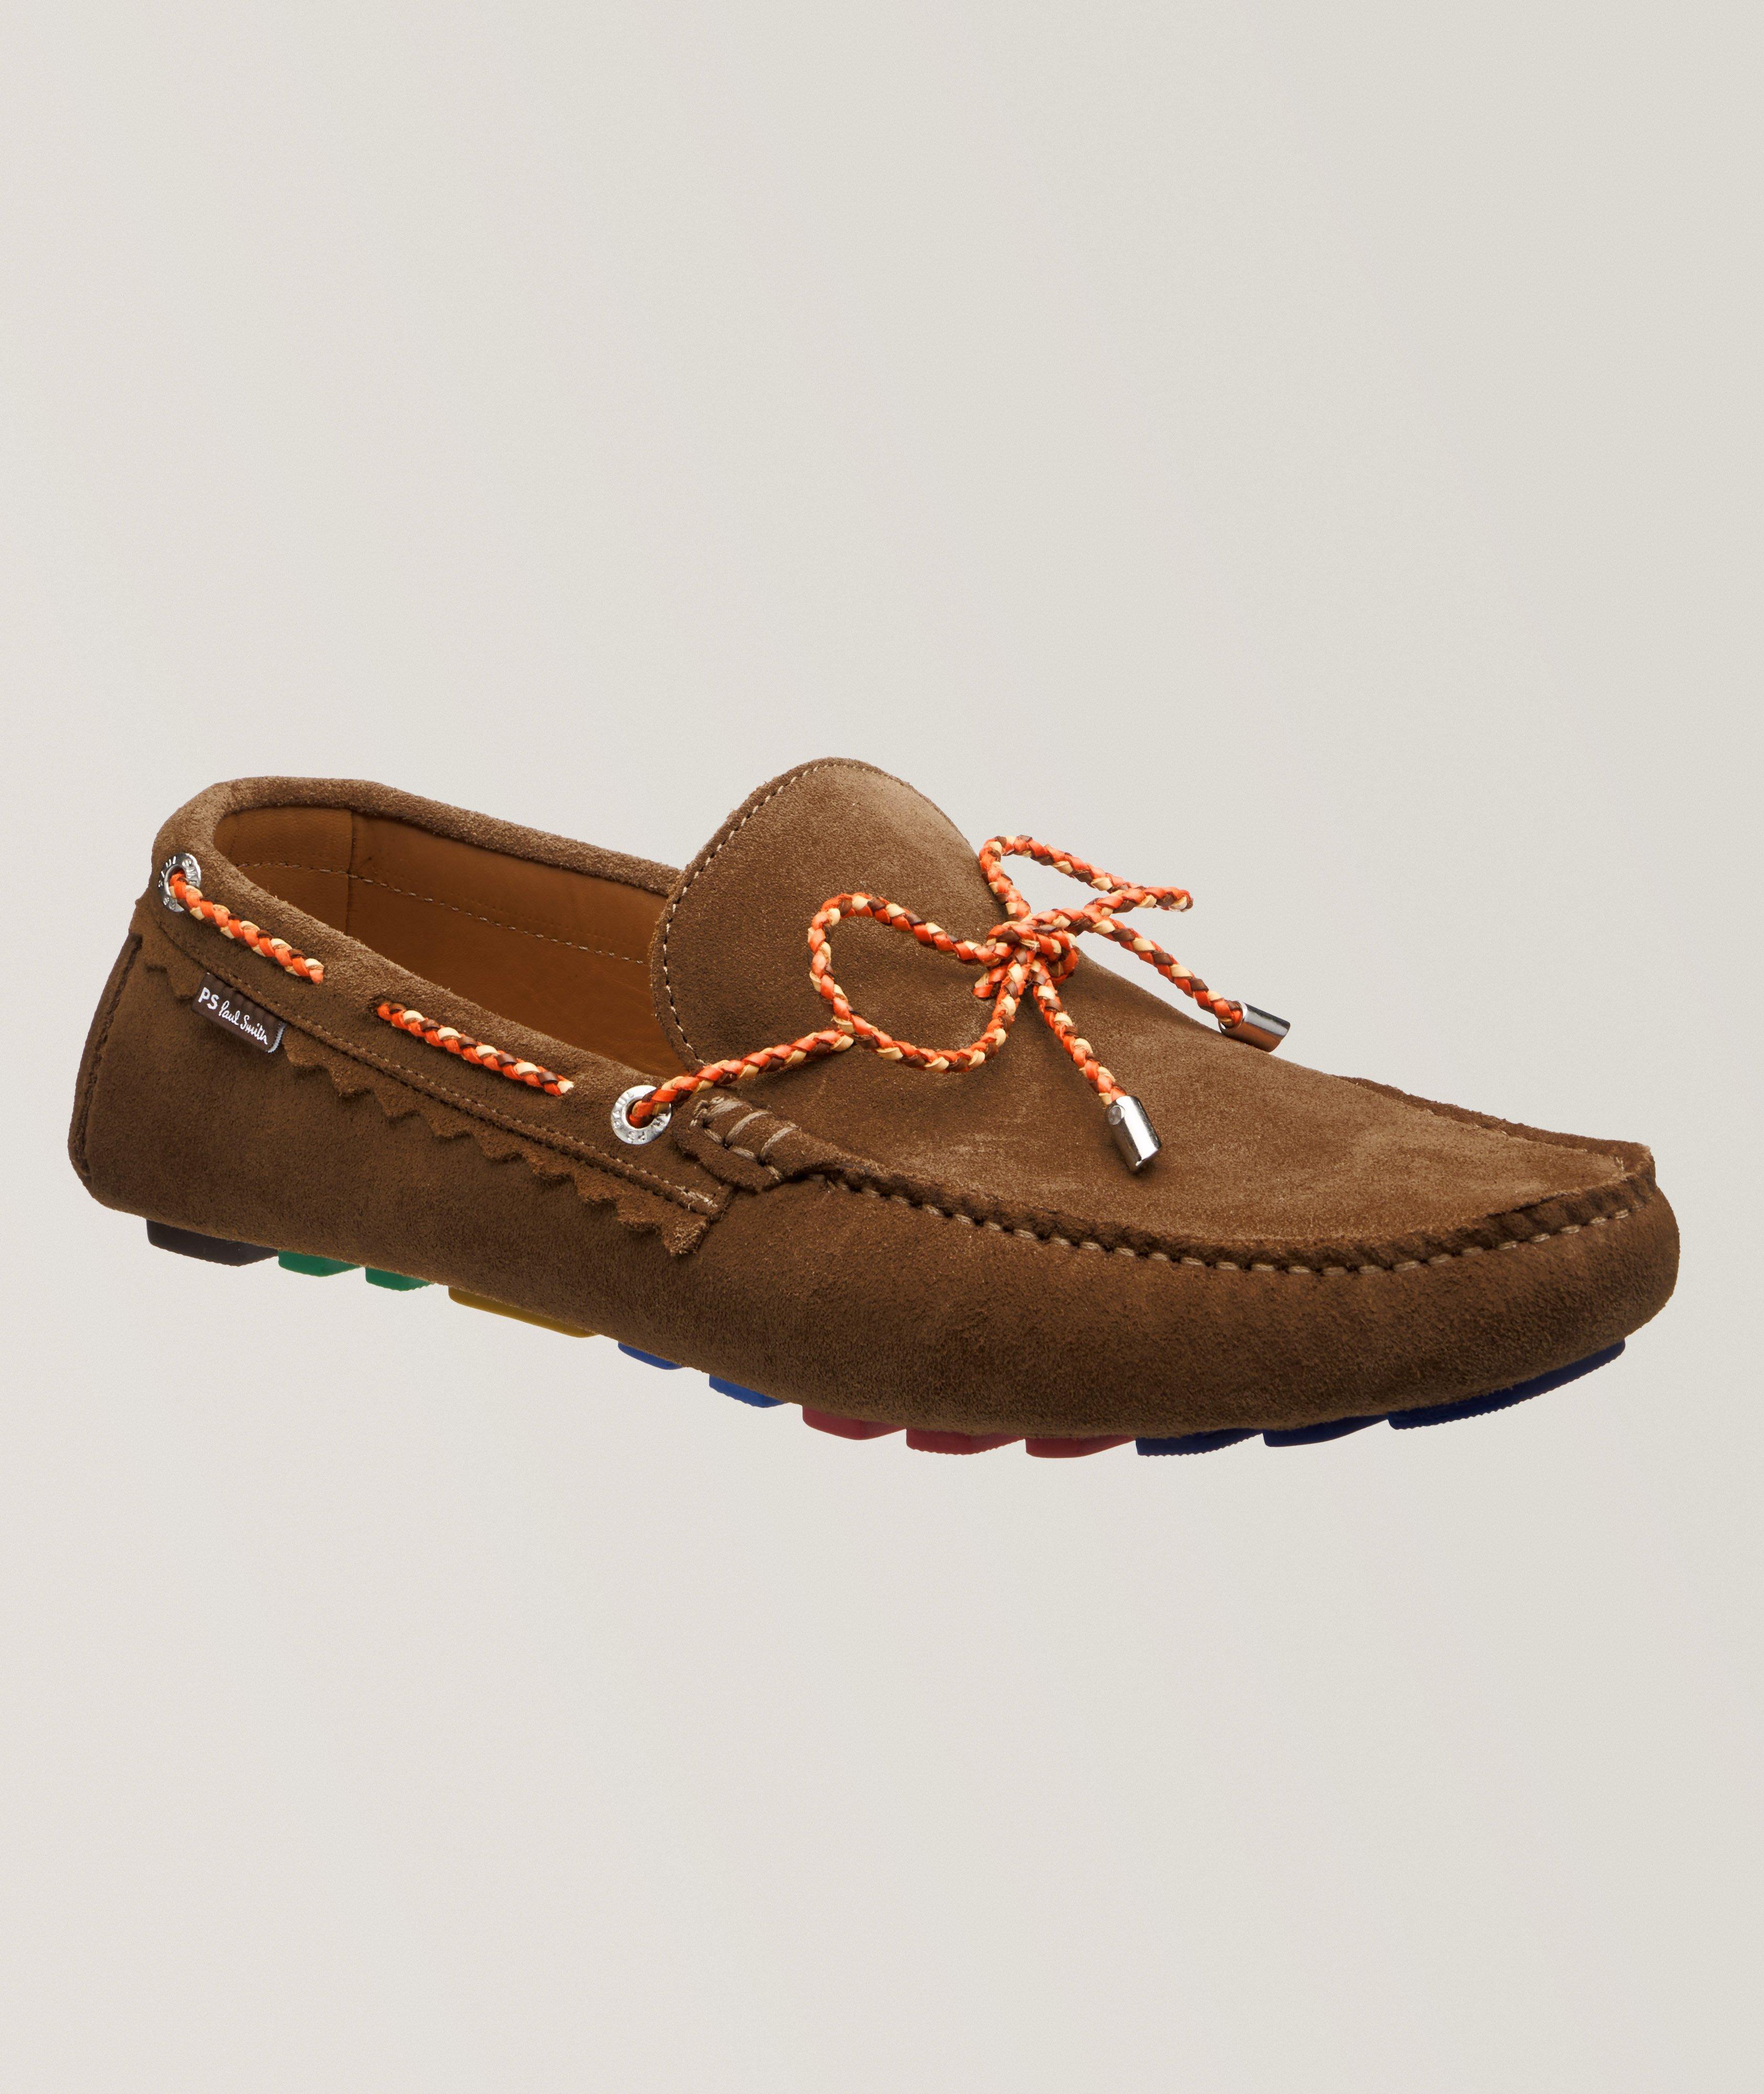 Springfield Suede Leather Driving Loafers image 0